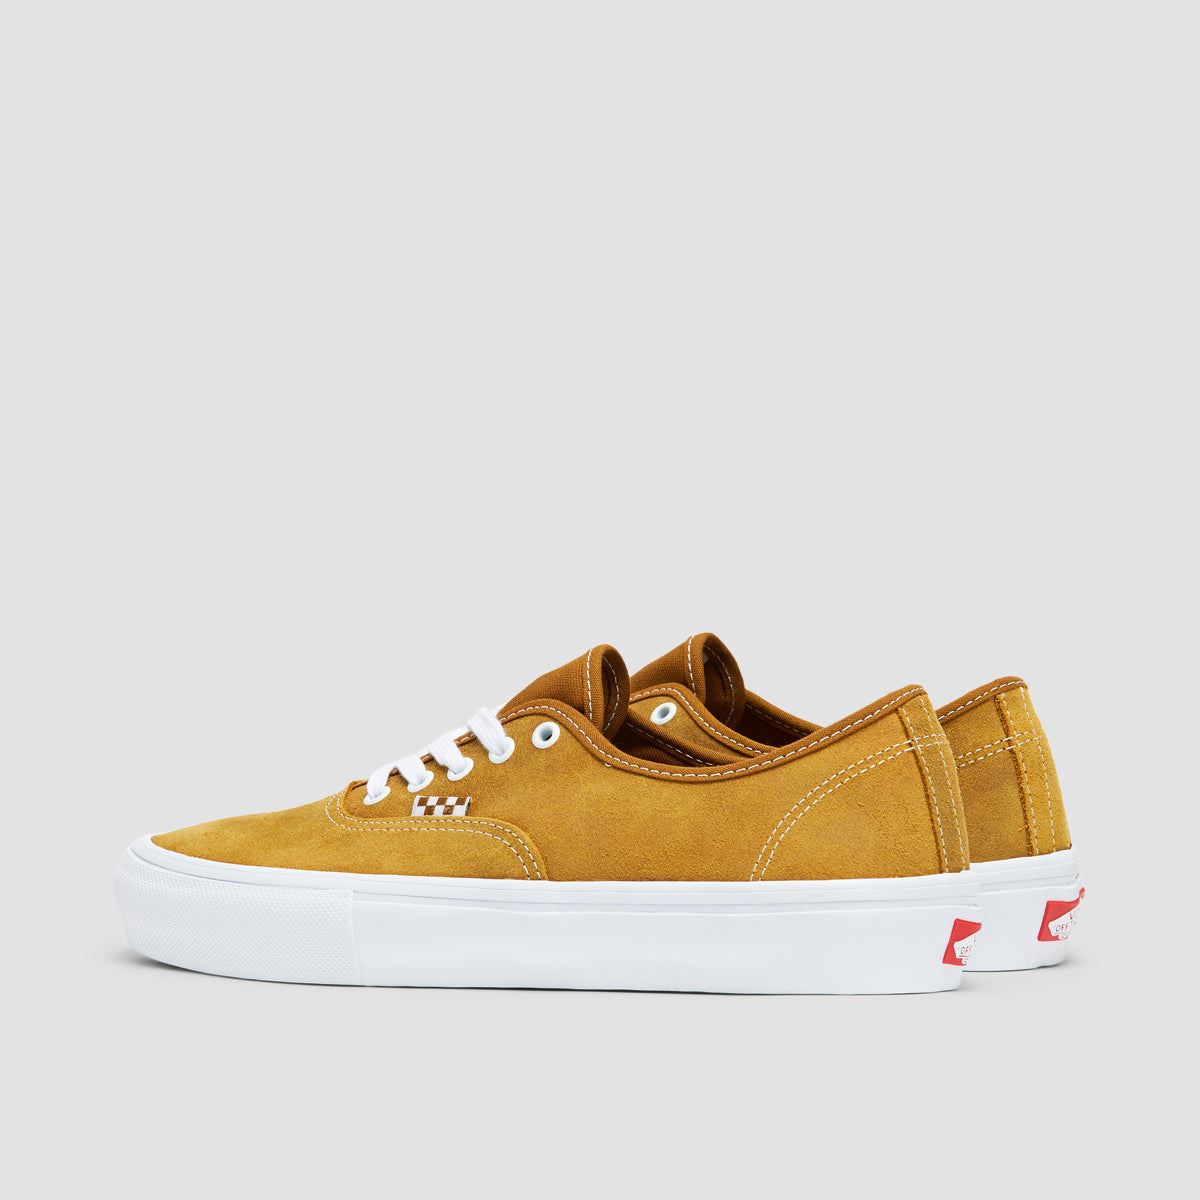 Vans Skate Authentic Shoes - Leather Golden Brown